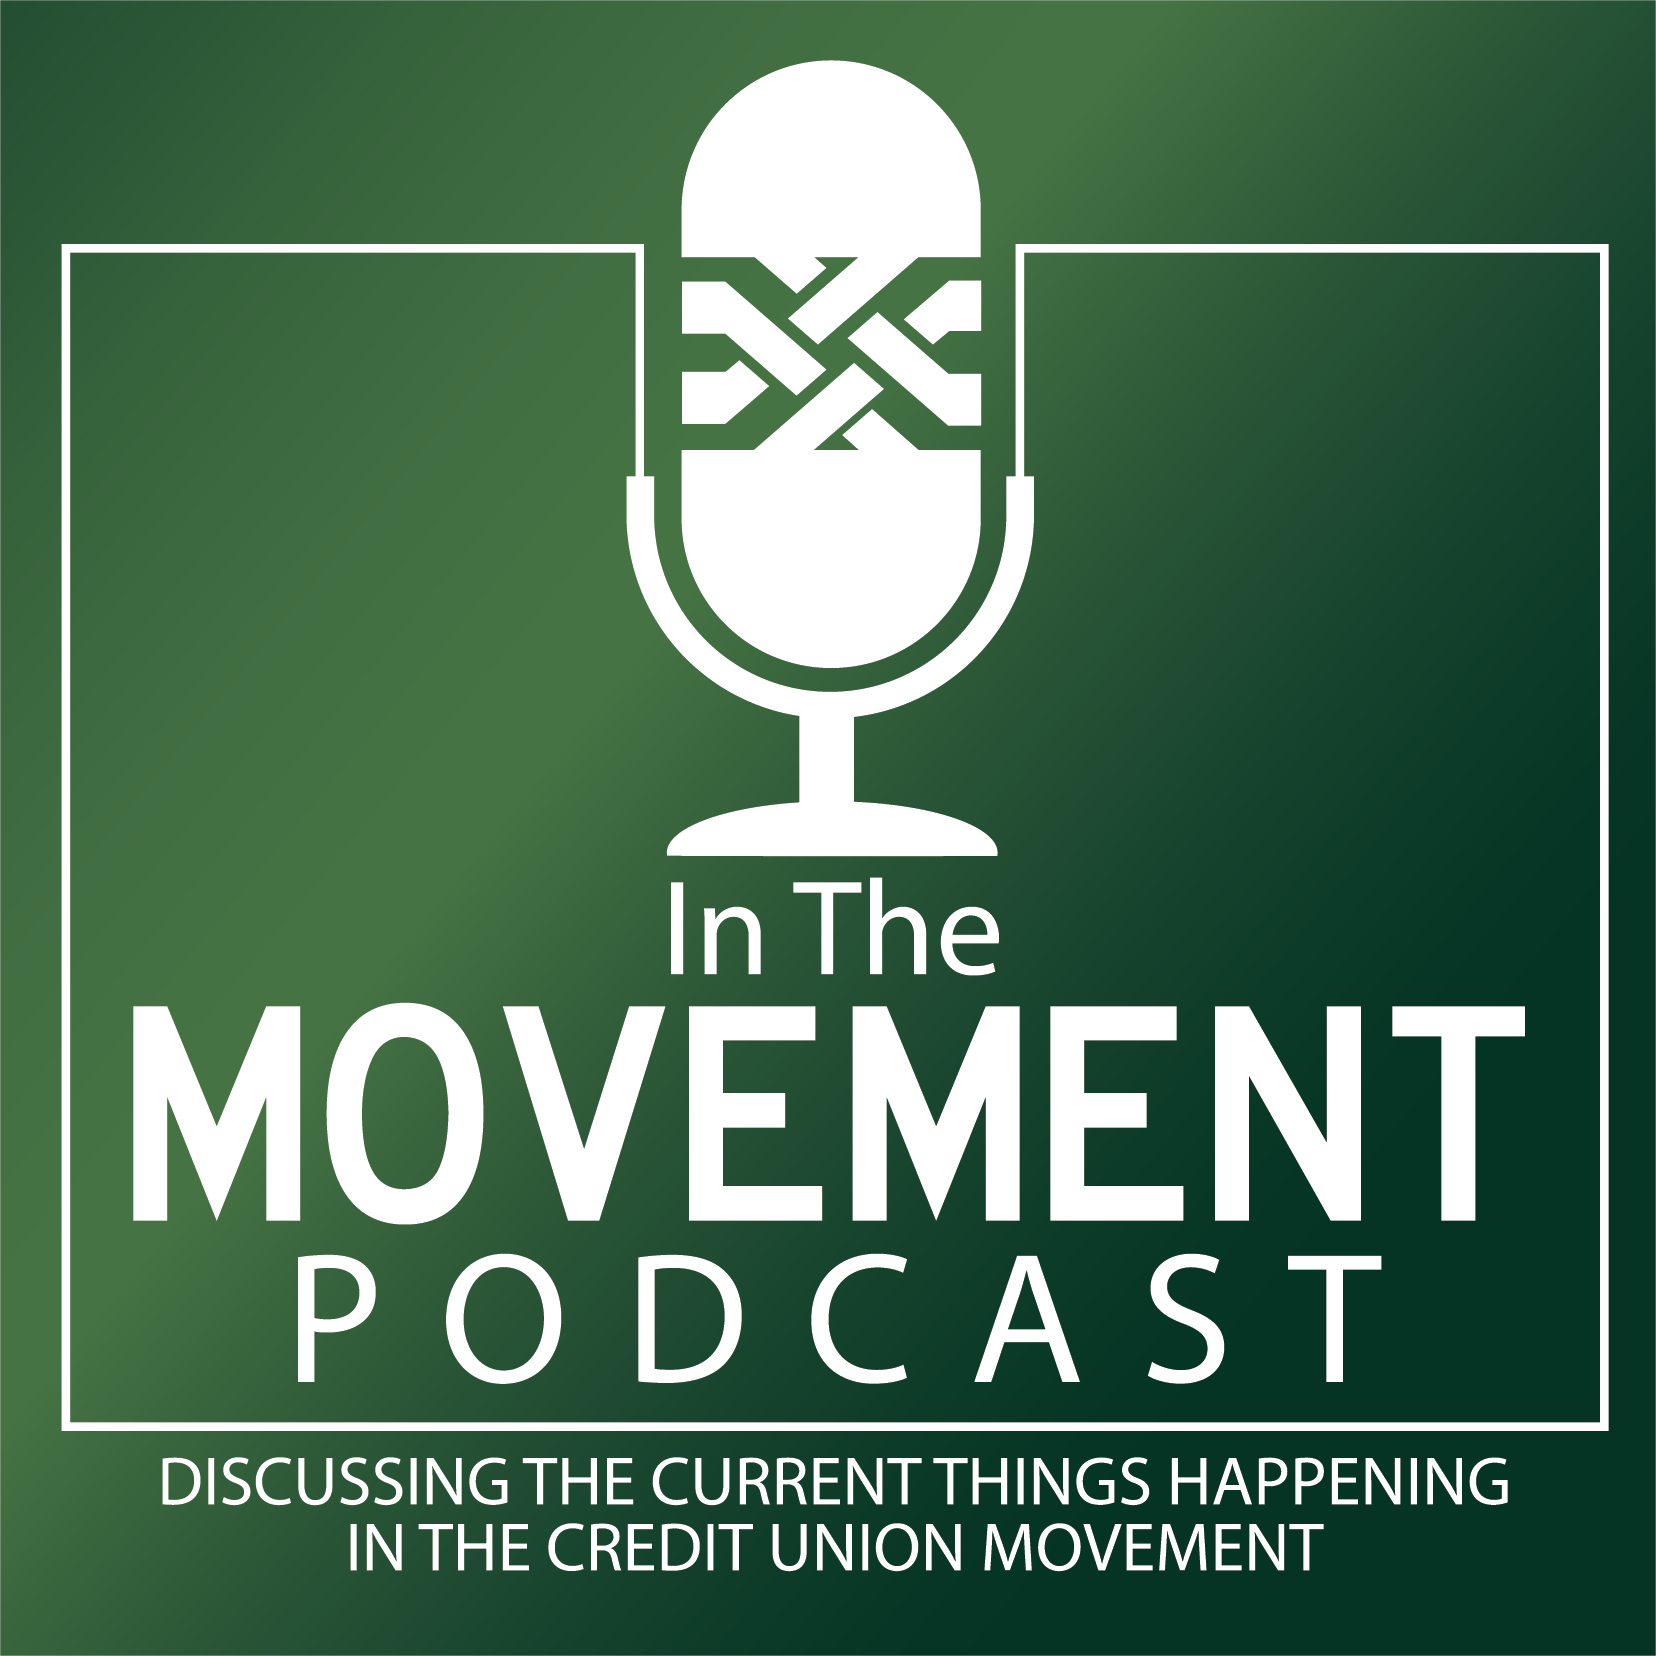 In the Movement Podcast